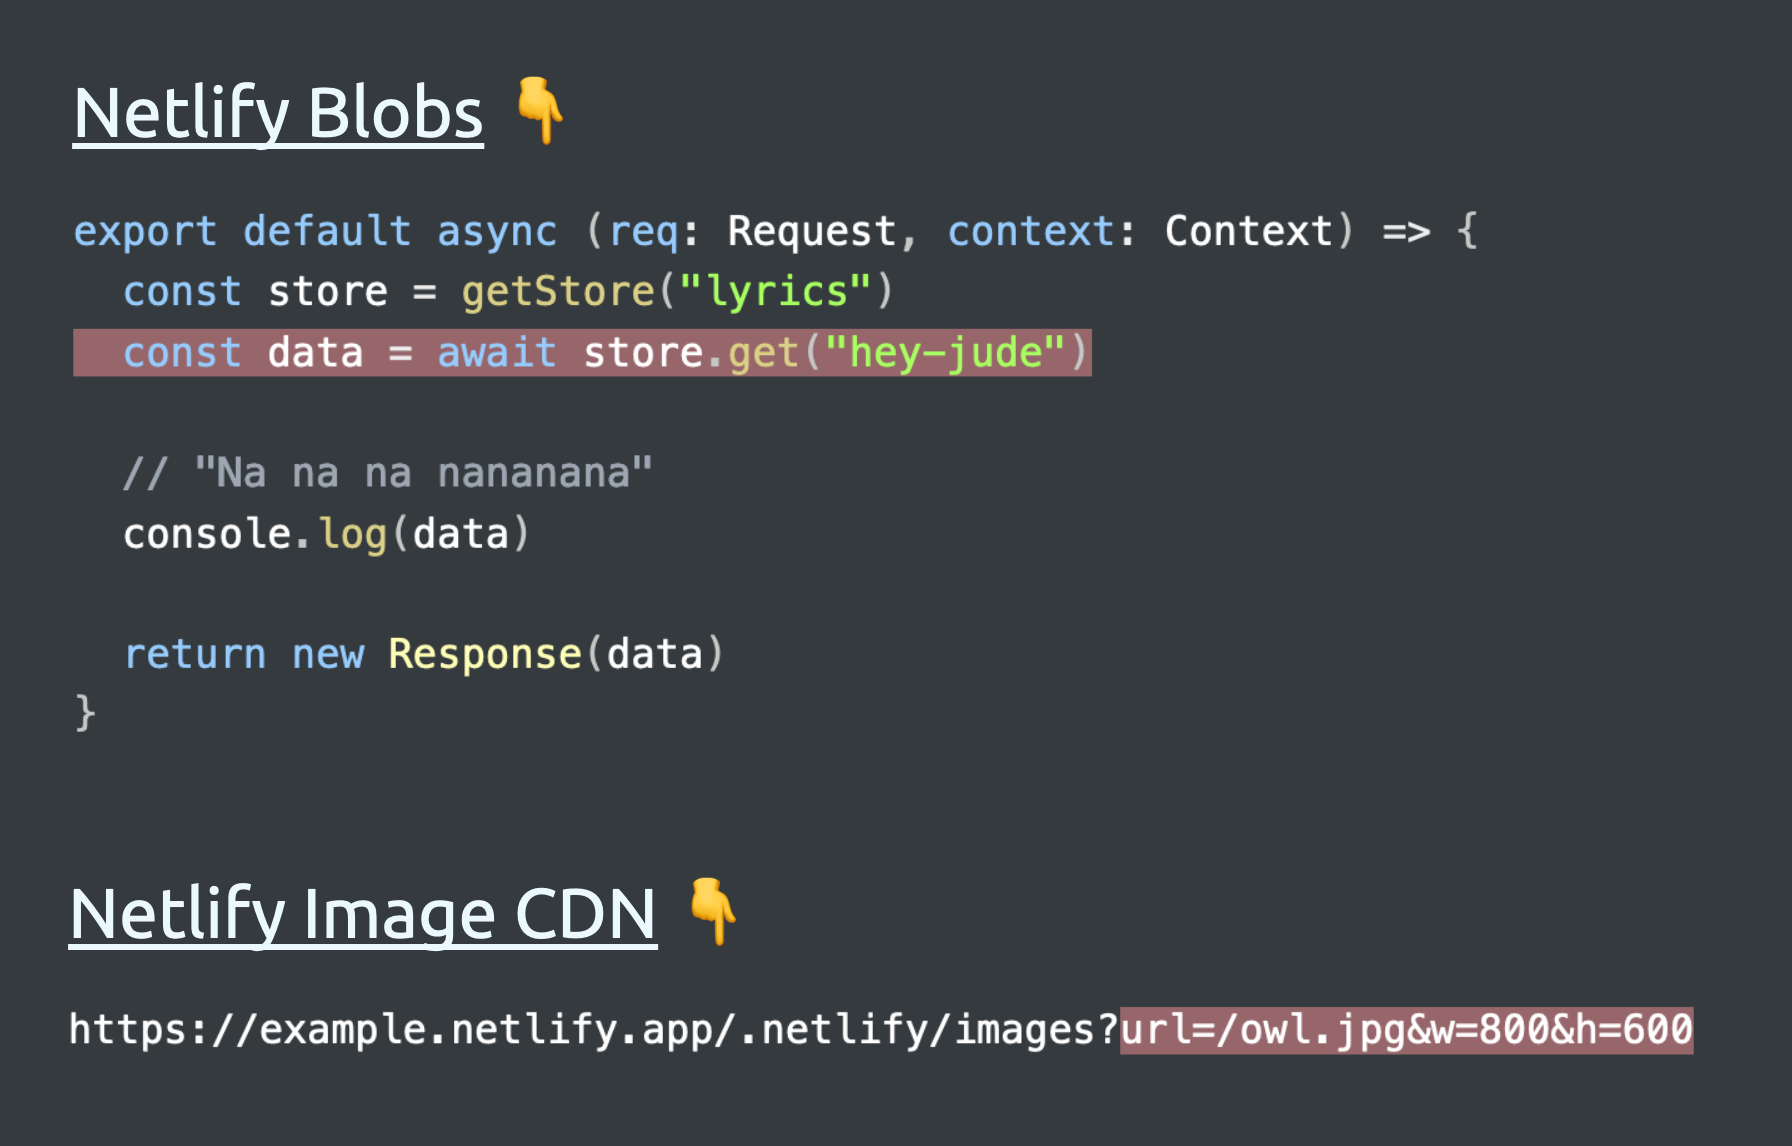 Code examples for Netlify Blobs and Netlify Image CDN